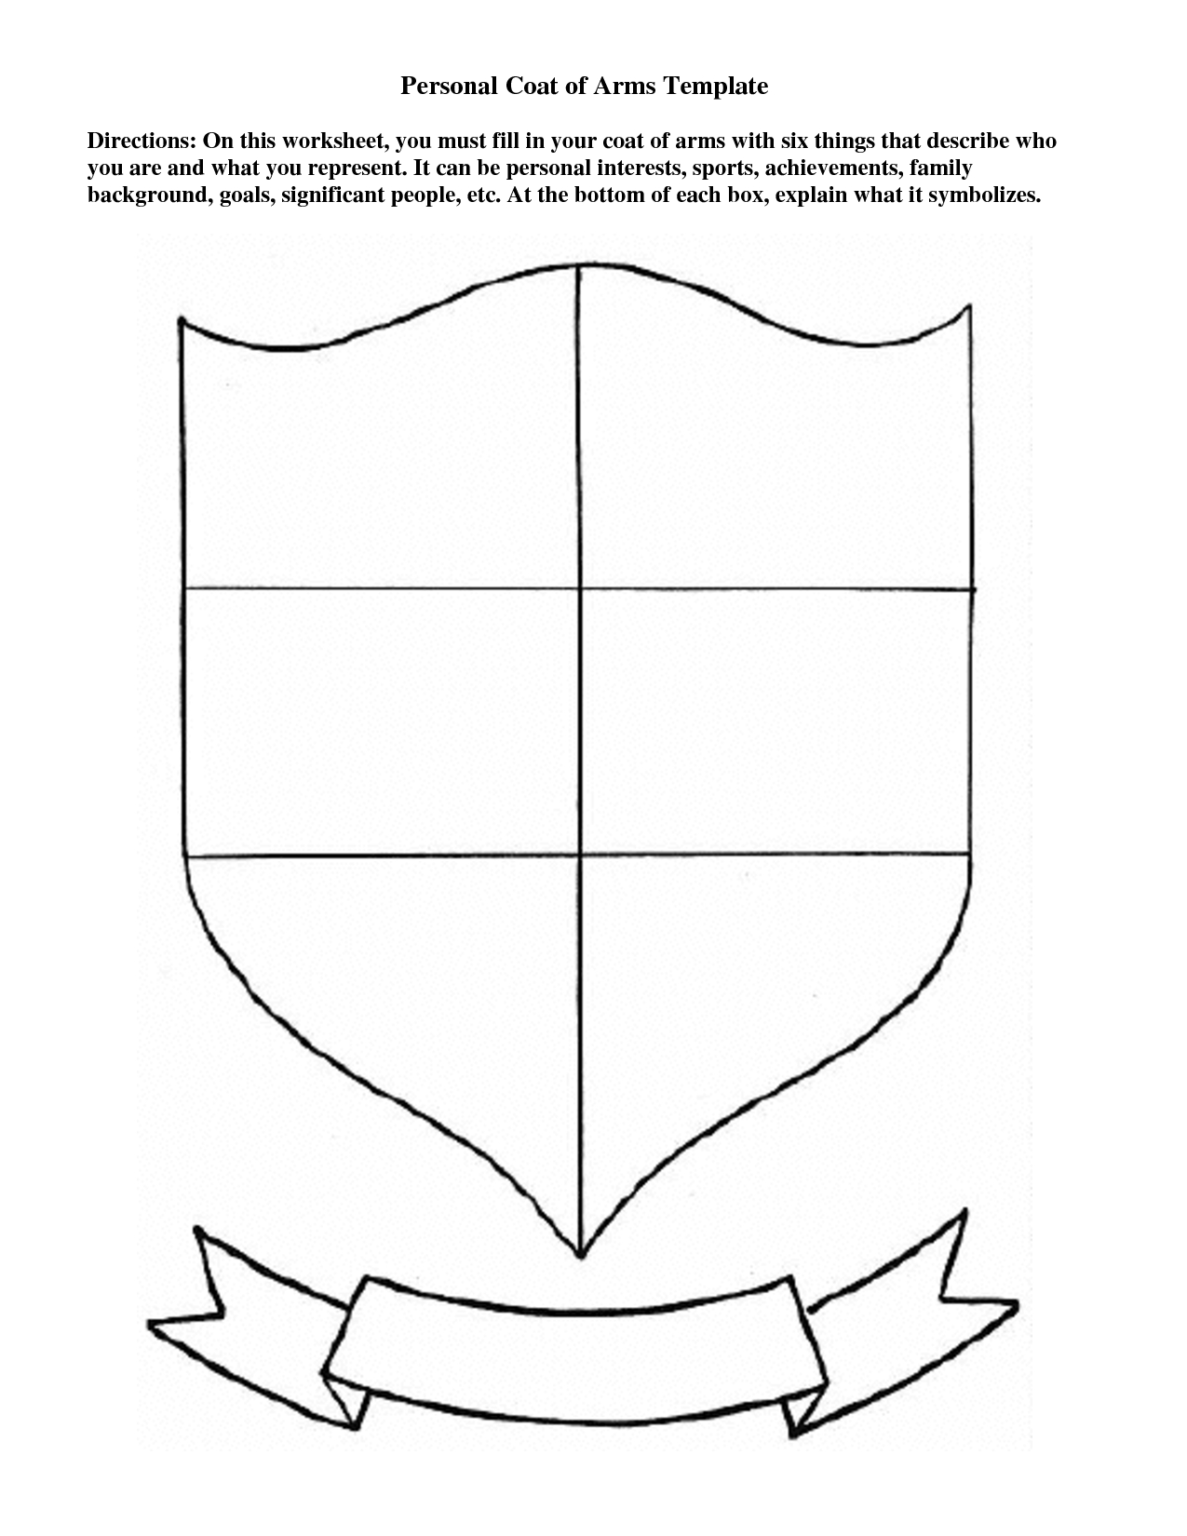 personal-coat-of-arms-template-coat-of-arms-templates-pertaining-to